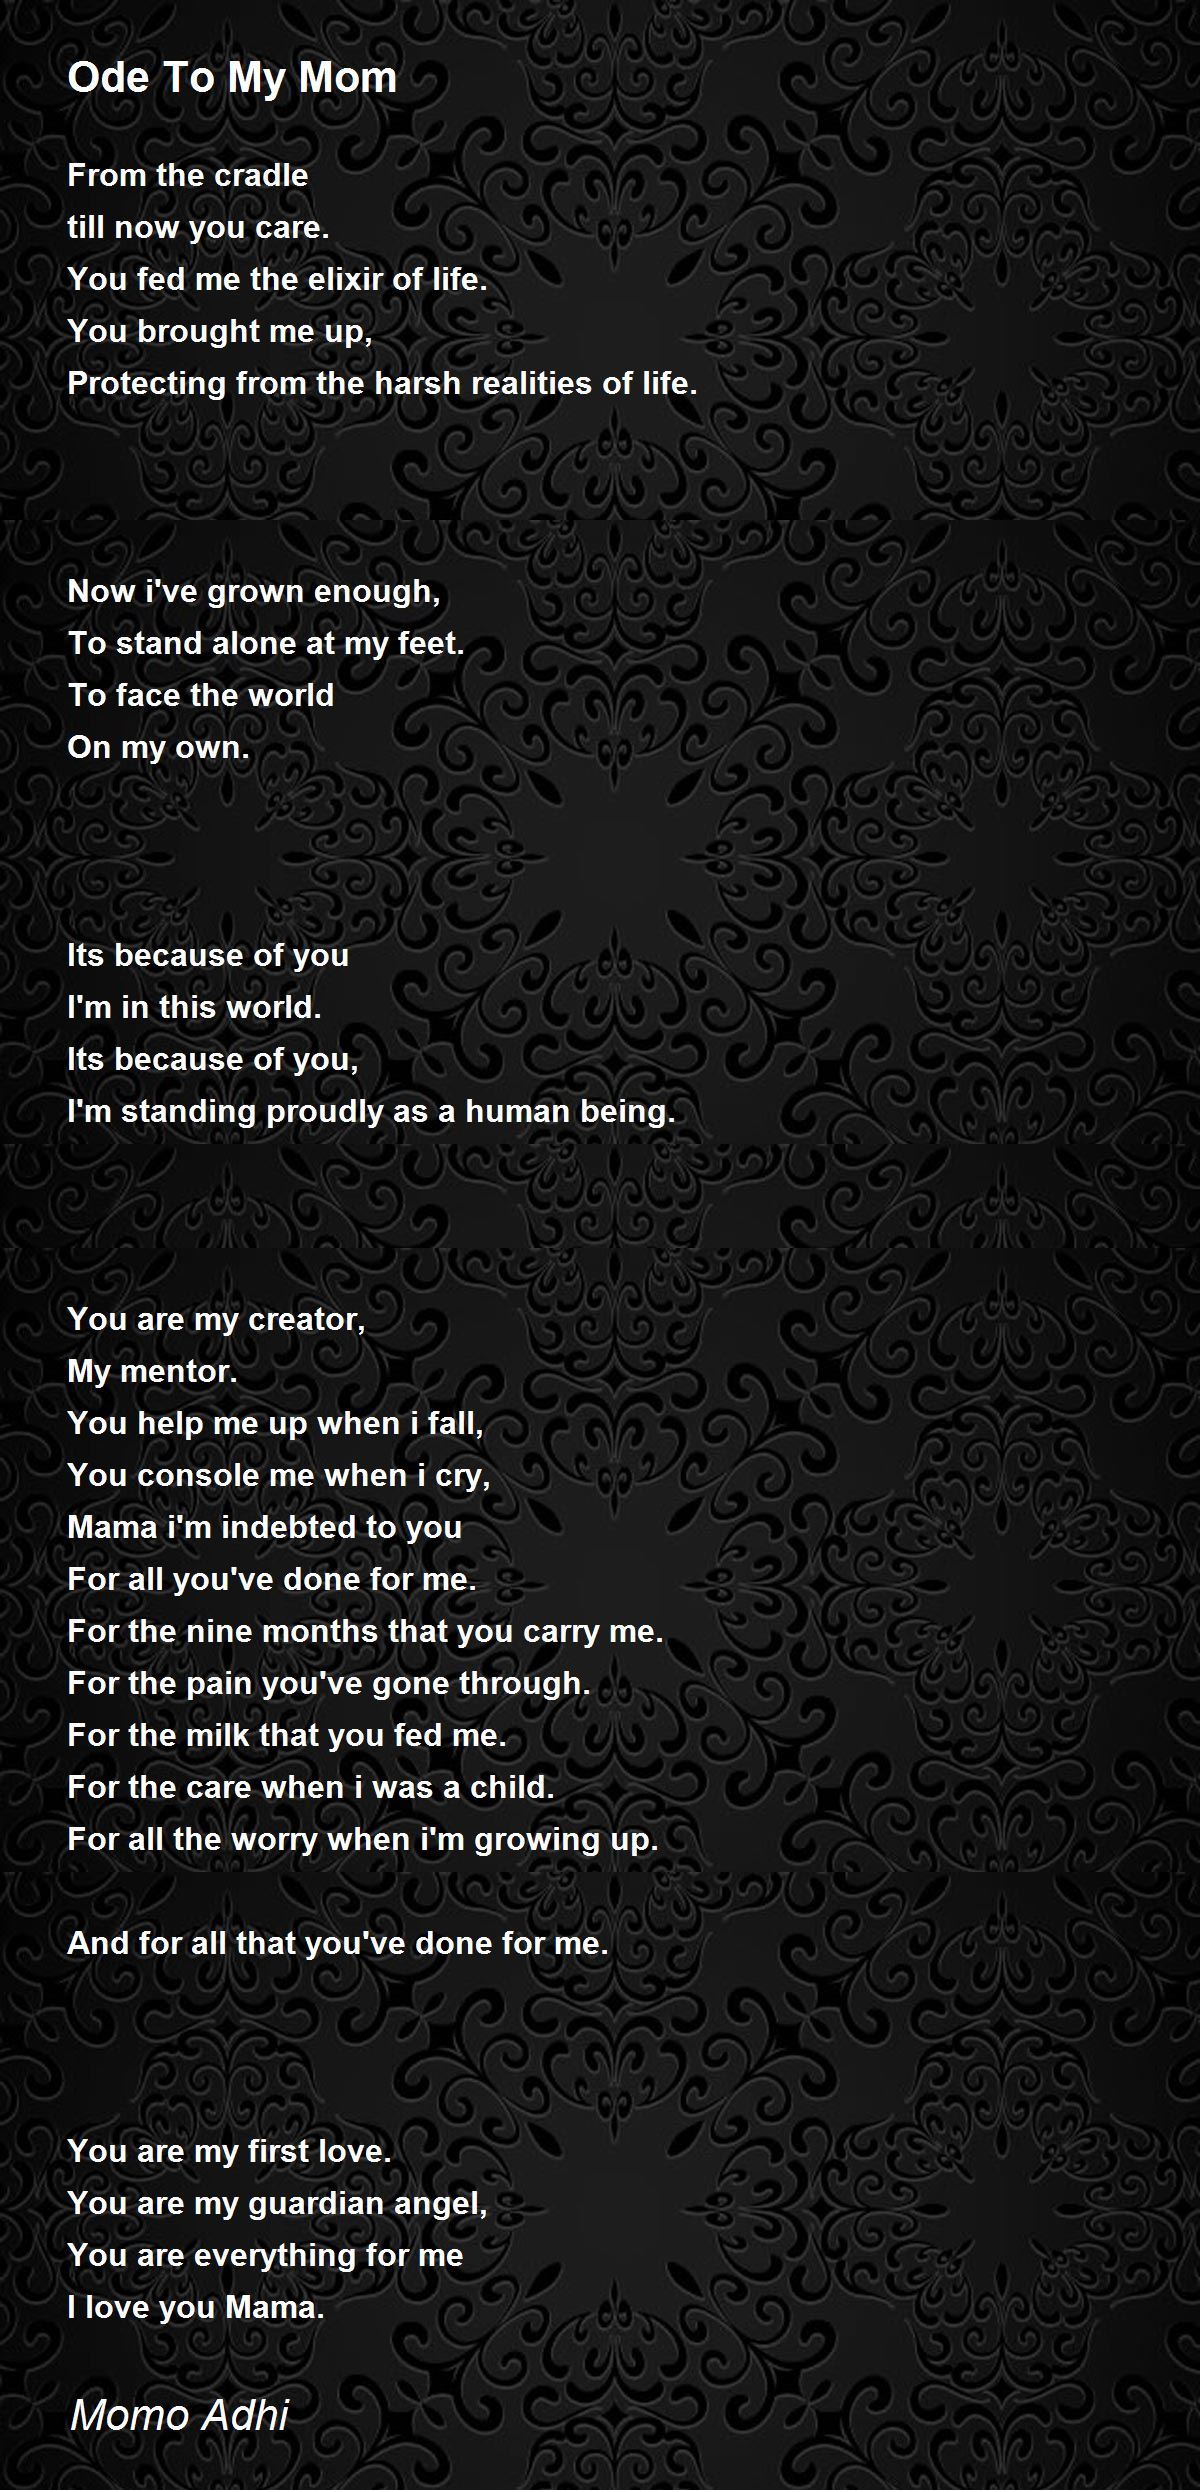 Ode To My Mom - Ode To My Mom Poem by Momo Adhi